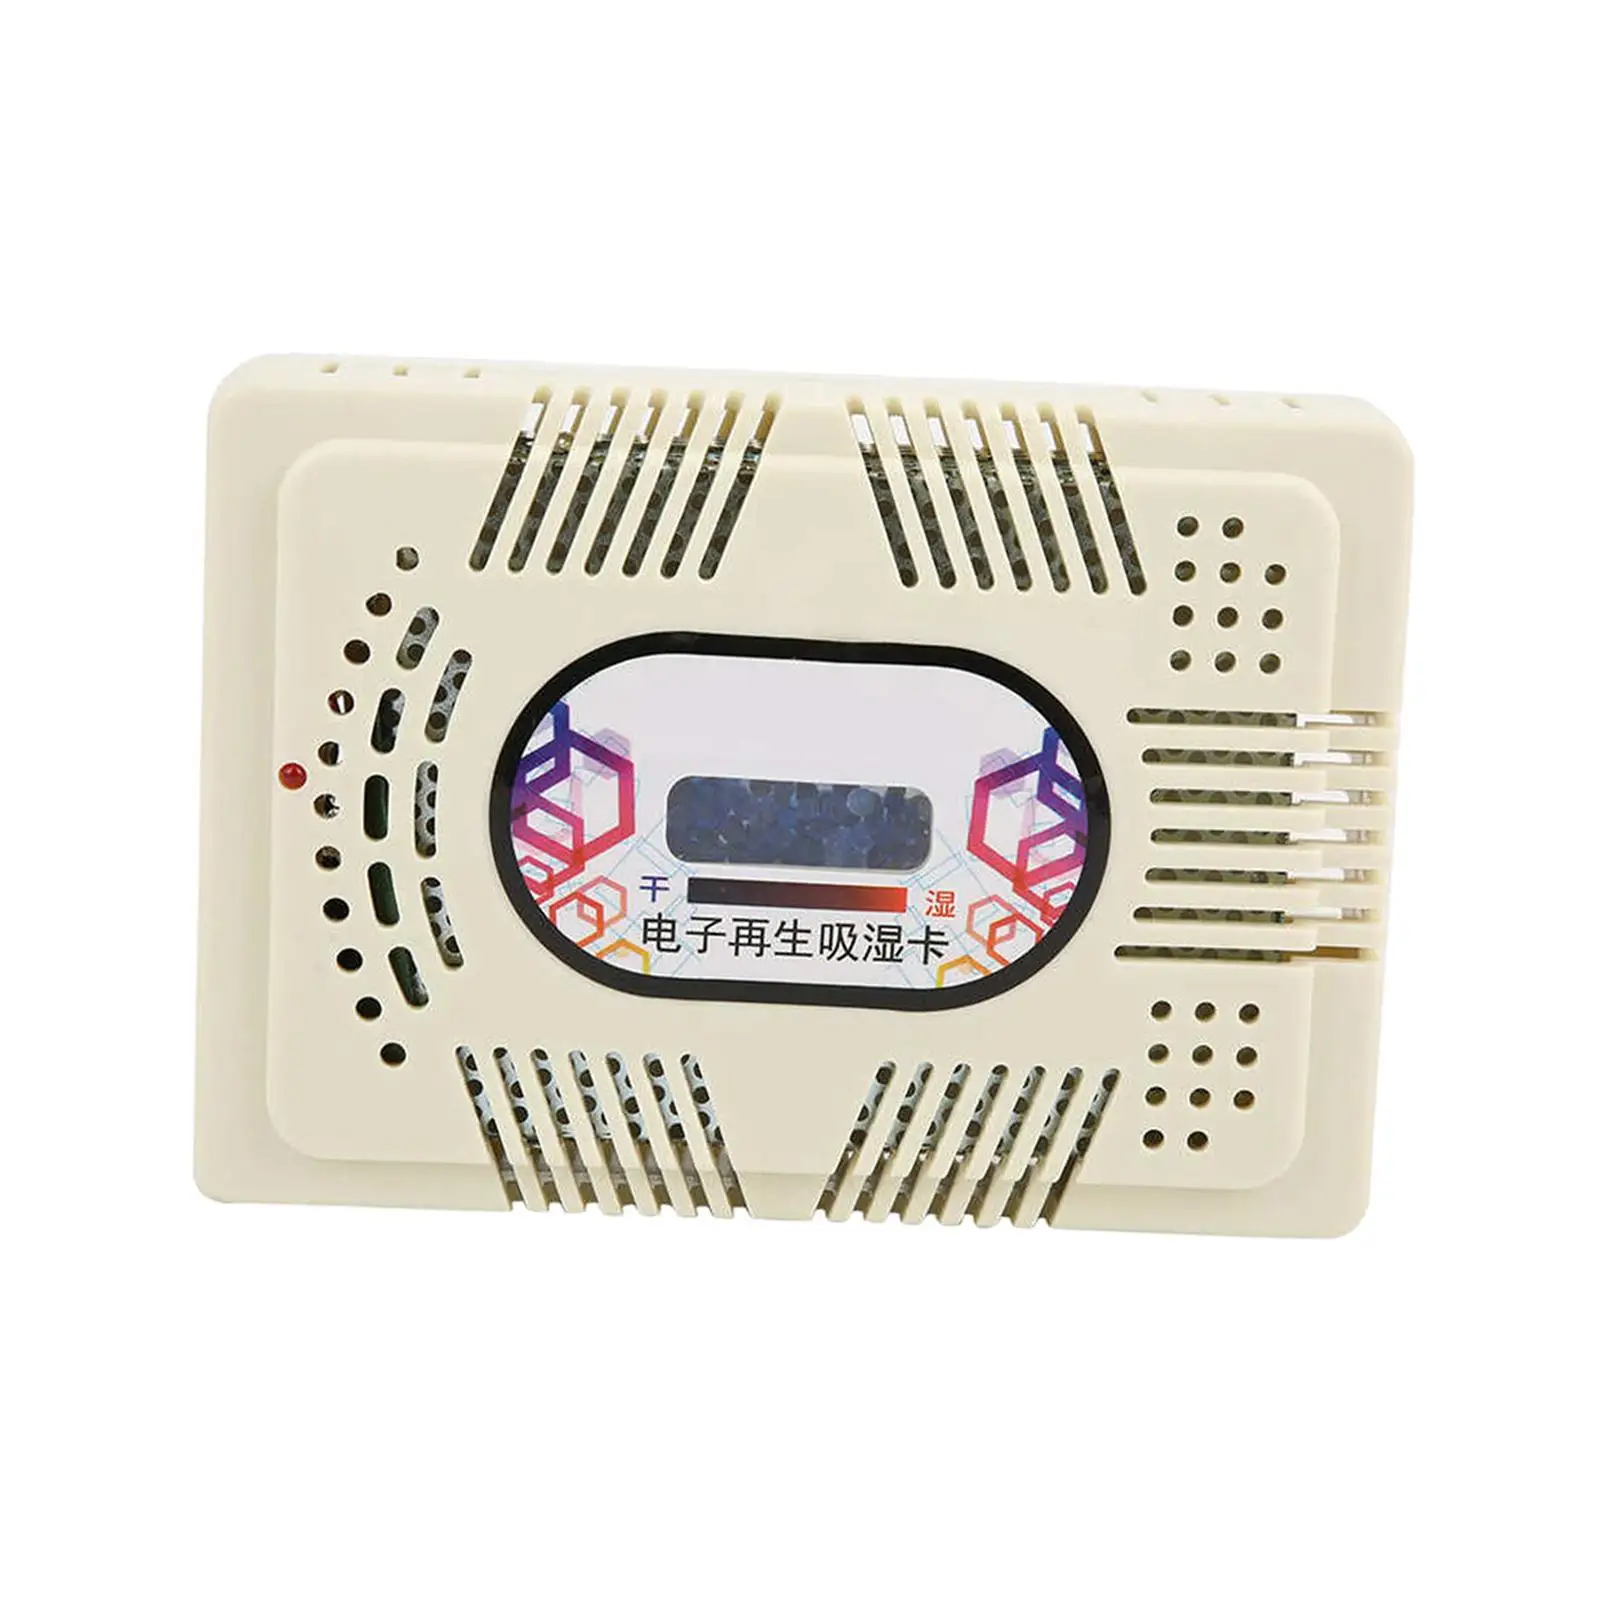 Electronic Regeneration Hygroscopic Card Dehumidifier High Performance Saving Space Durable 16W Portable Accessory US Adapter